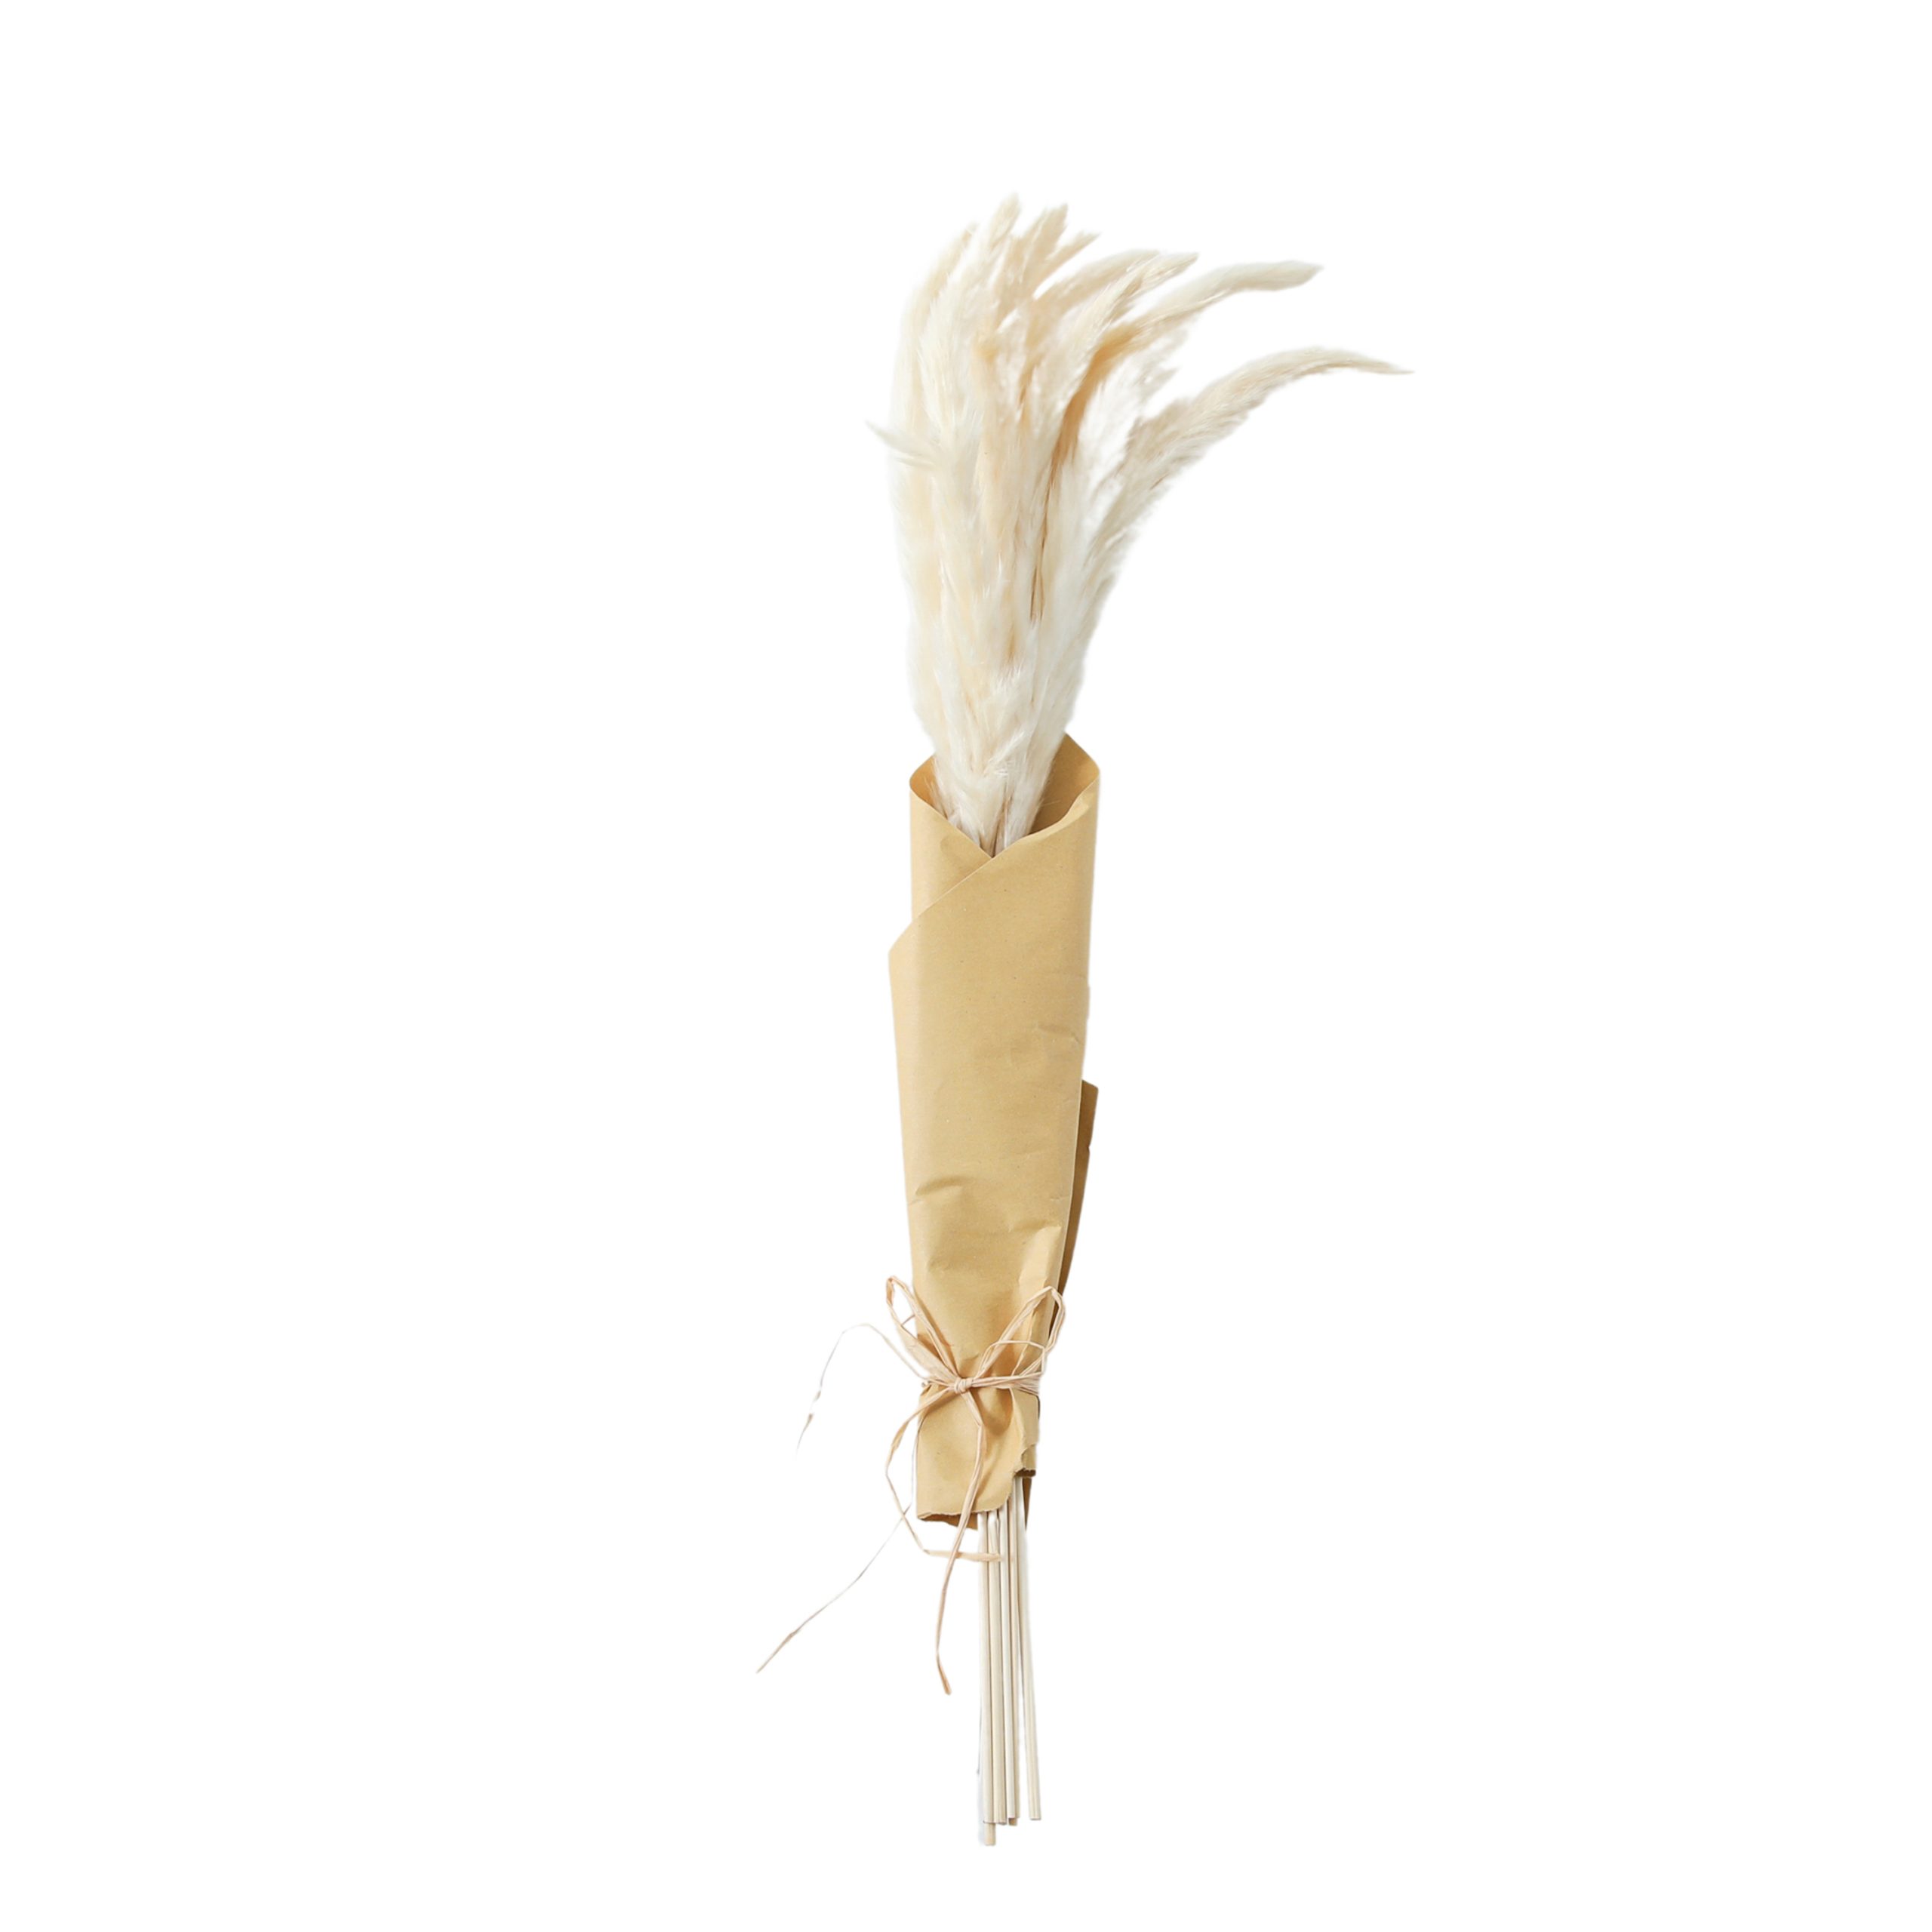 Gallery Direct Dried Reed Grass Bundle in Paper Wrap White